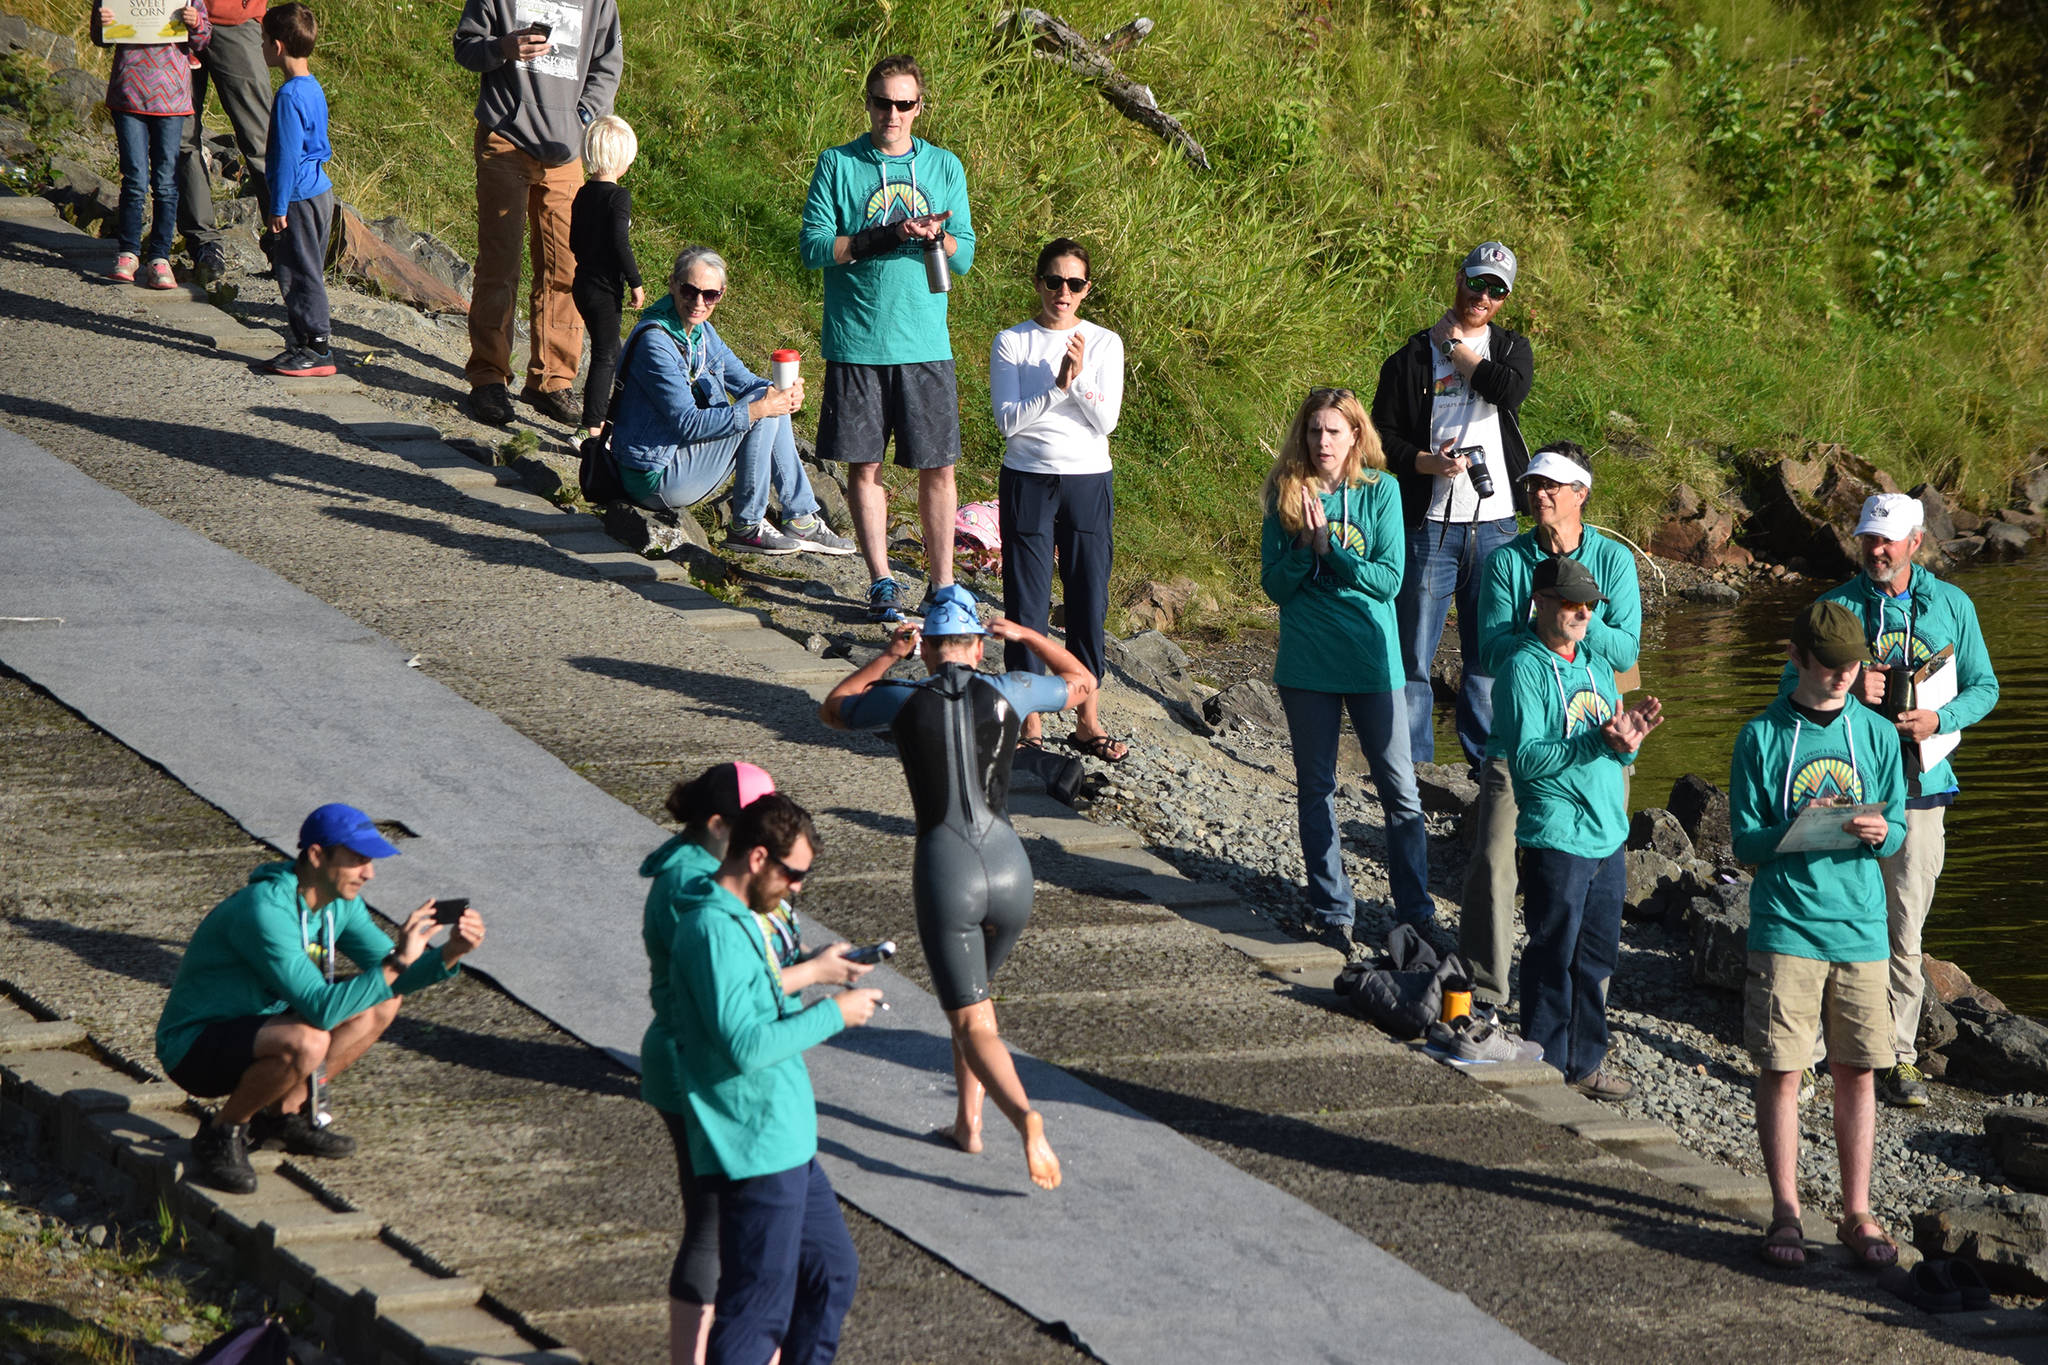 Aukeman Triathlon supporters and volunteers cheer on a swimmer as they leave Auke Lake on Saturday, Aug. 3, 2019. Juneau is being considered to host a three-year series of Ironman triathlons, the first of which would be held next August. (Nolin Ainsworth/Juneau Empire File)